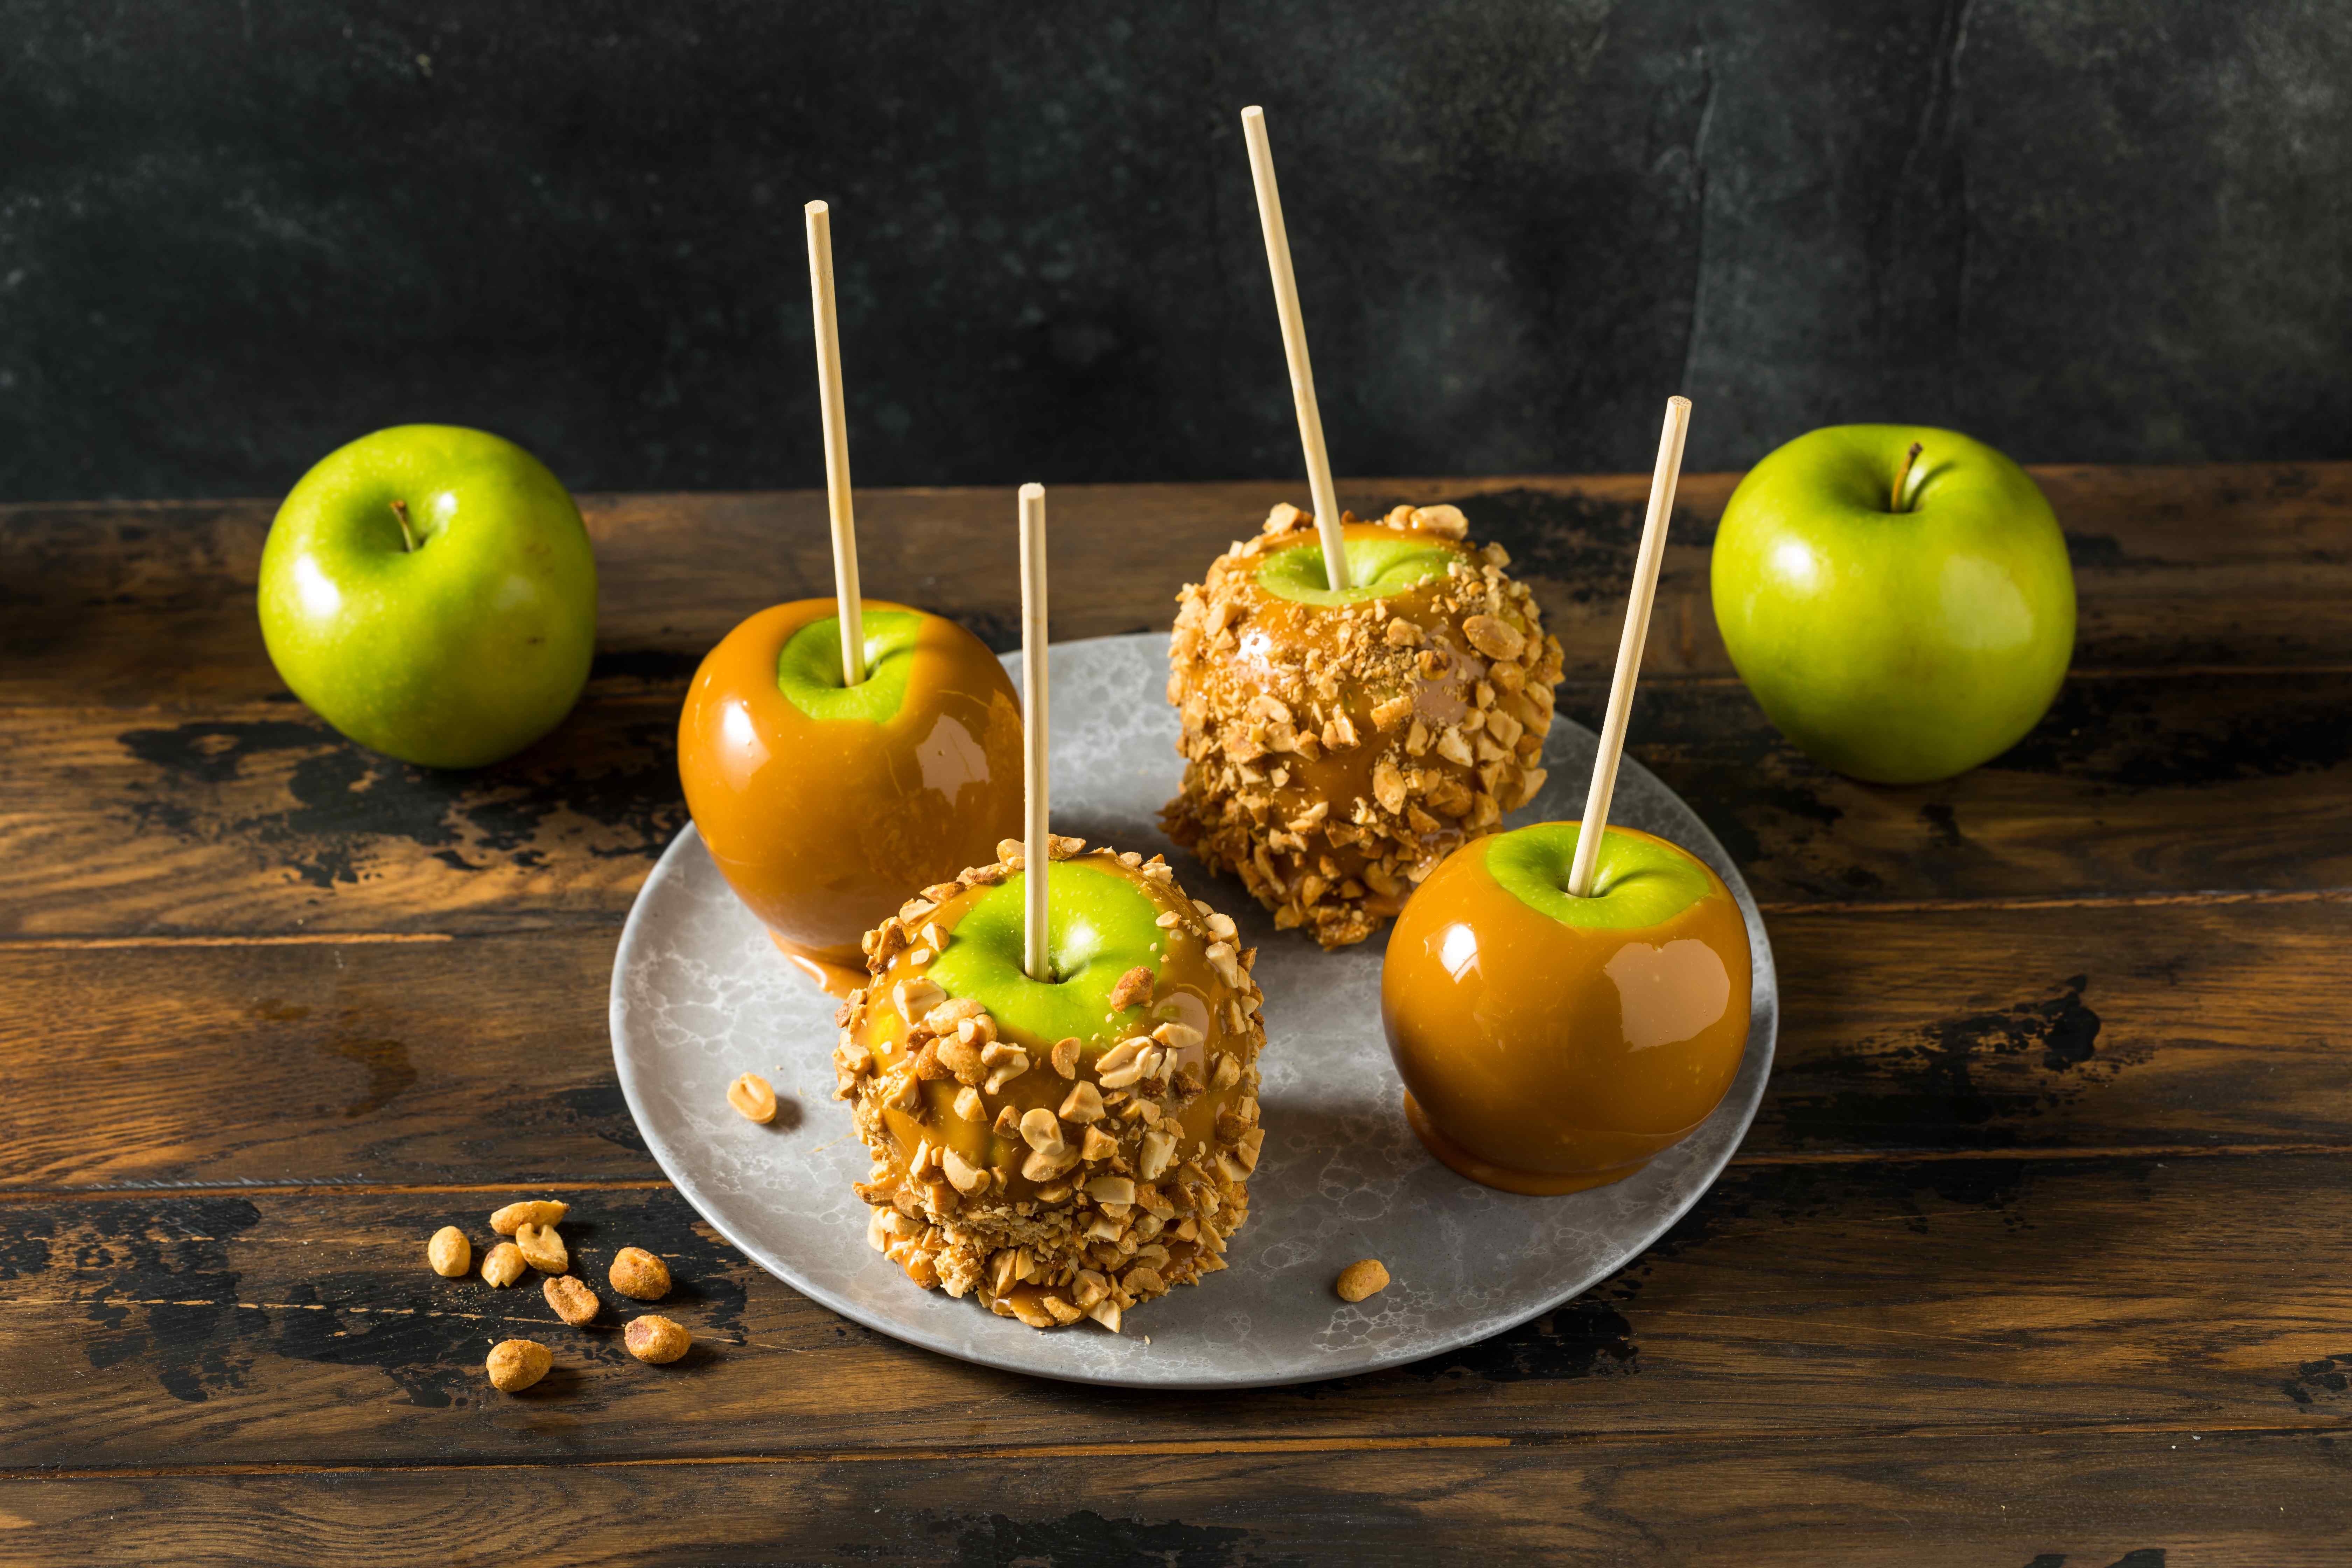 Freshly-dipped caramel apples for a family-friendly Halloween party at home